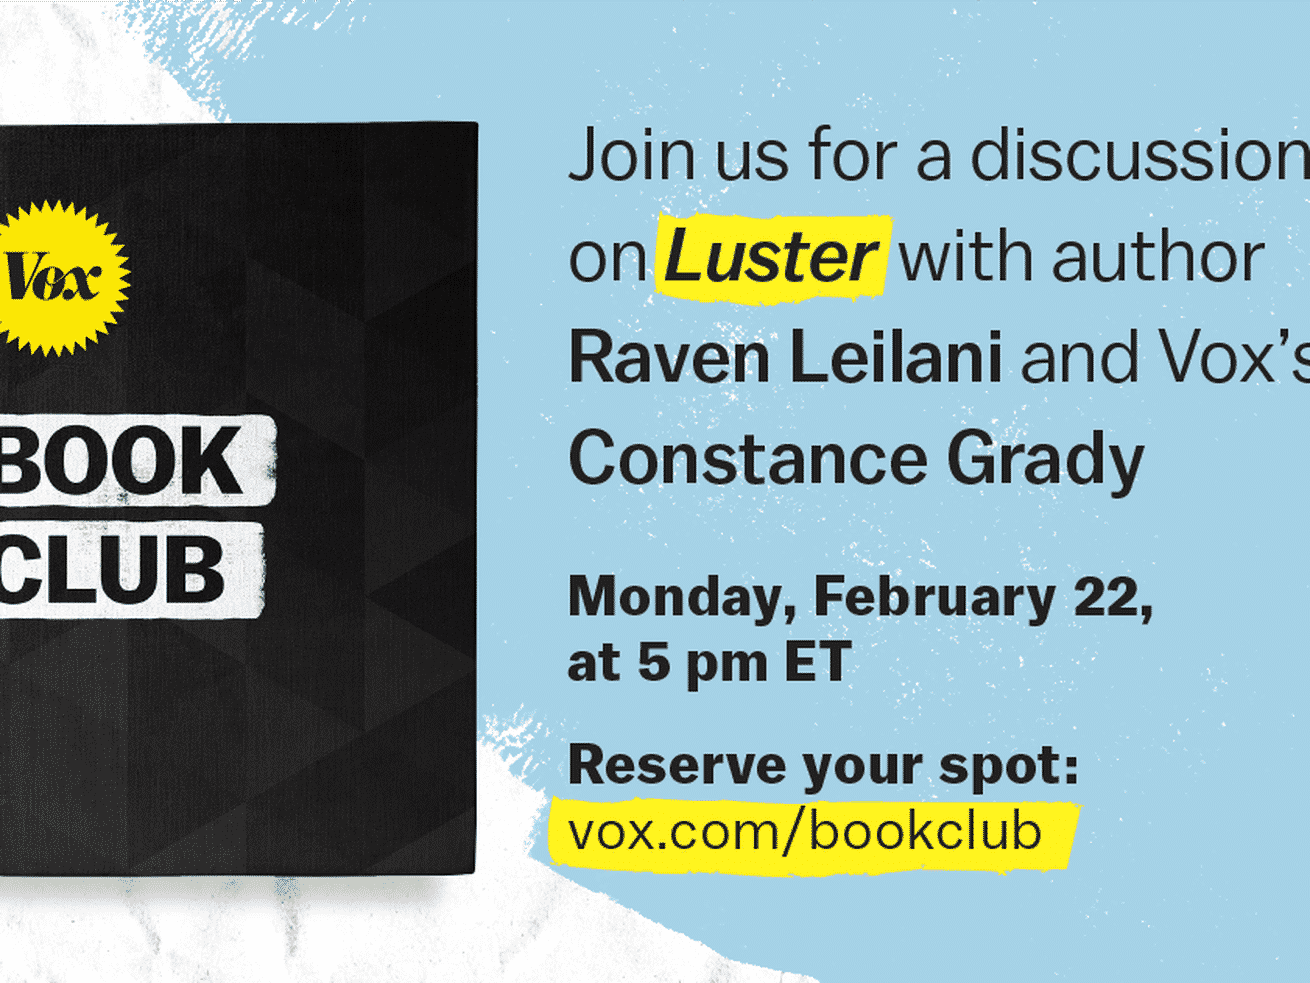 Join Raven Leilani to discuss her debut novel Luster live on Zoom